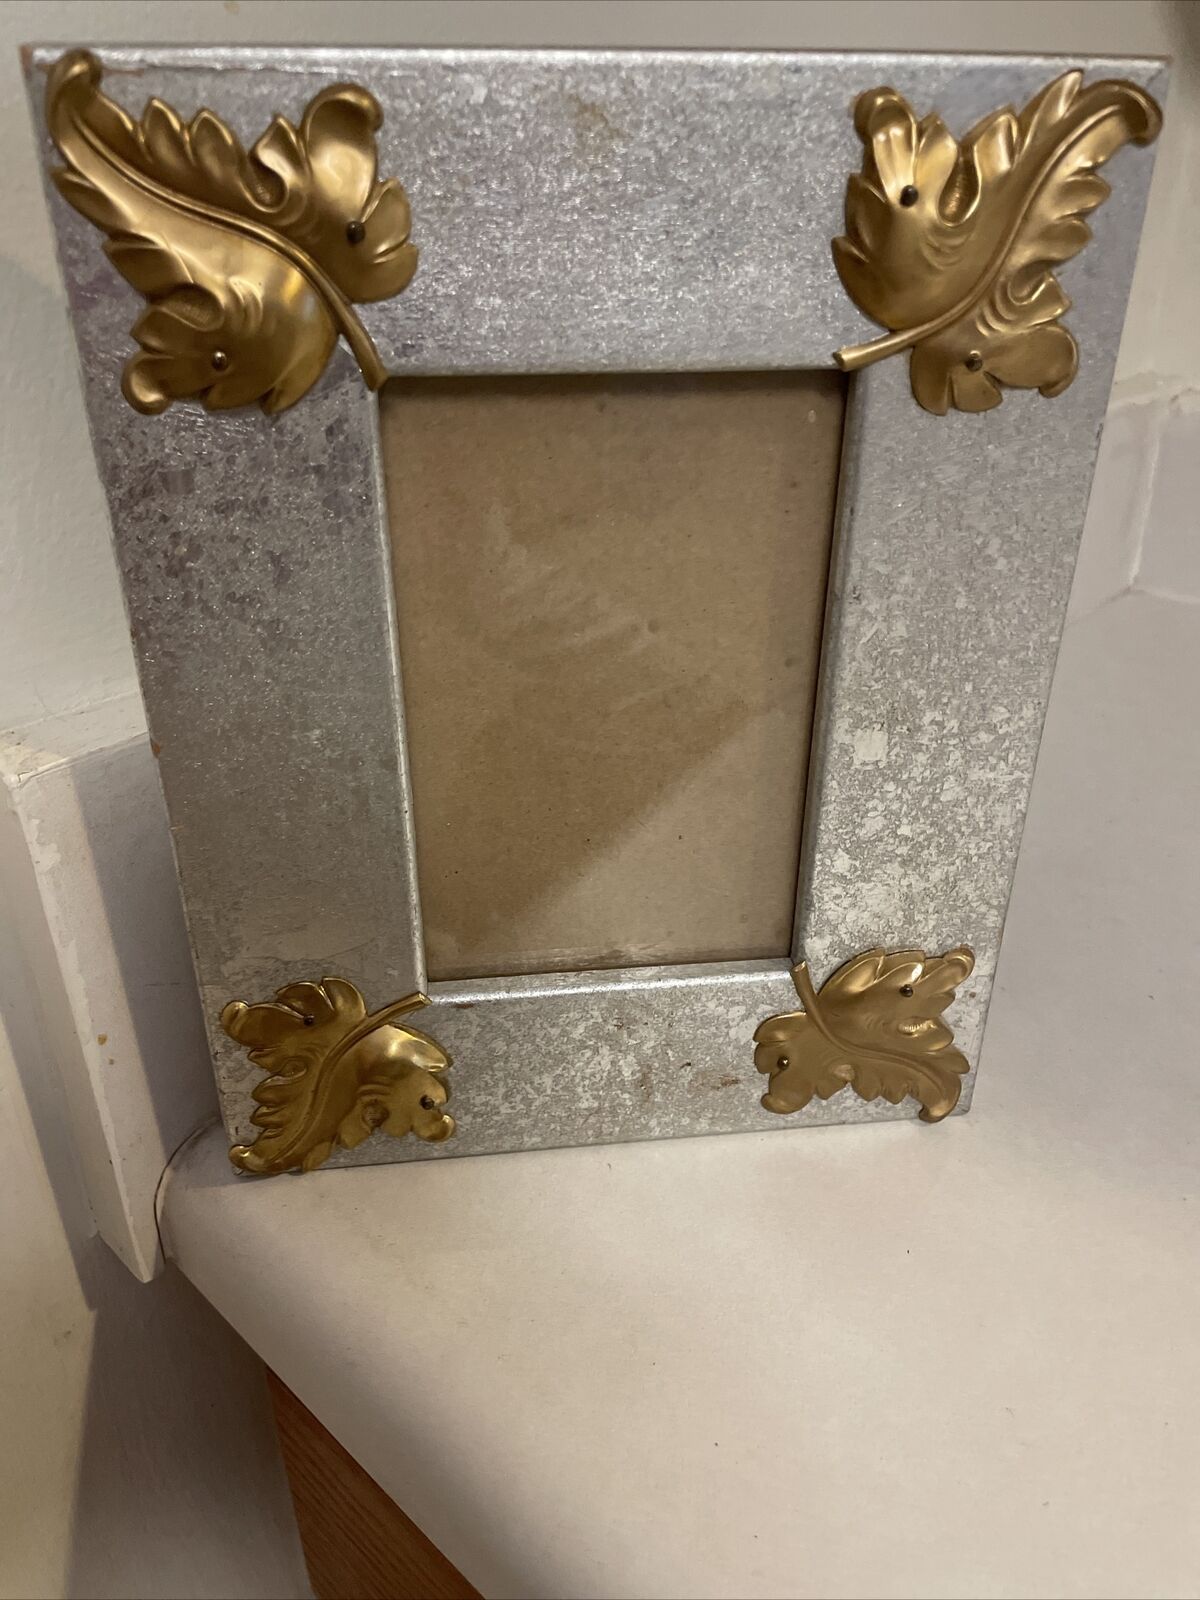 Vintage 9.75 X7.5” Metal Silver & Gold Leaf Picture Frame Fits 4x6” Photo